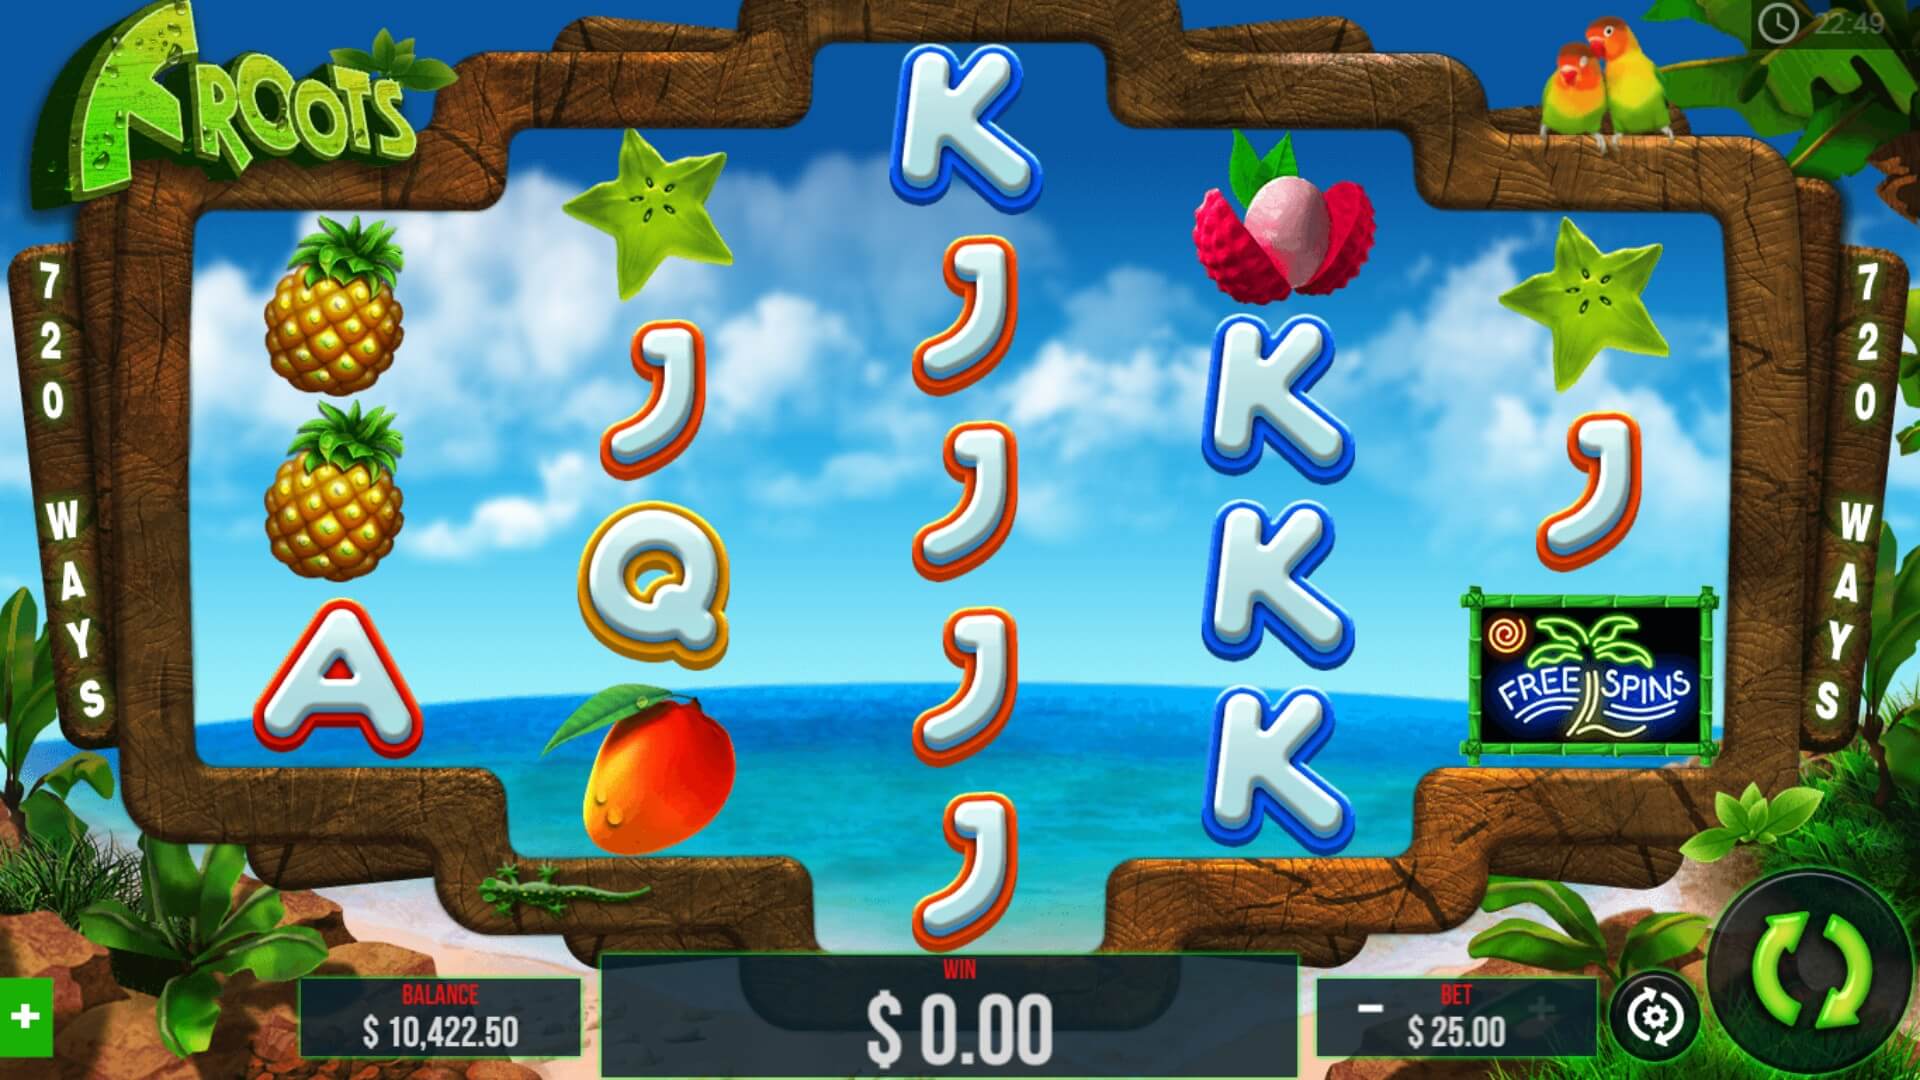 Froots Slot Gameplay